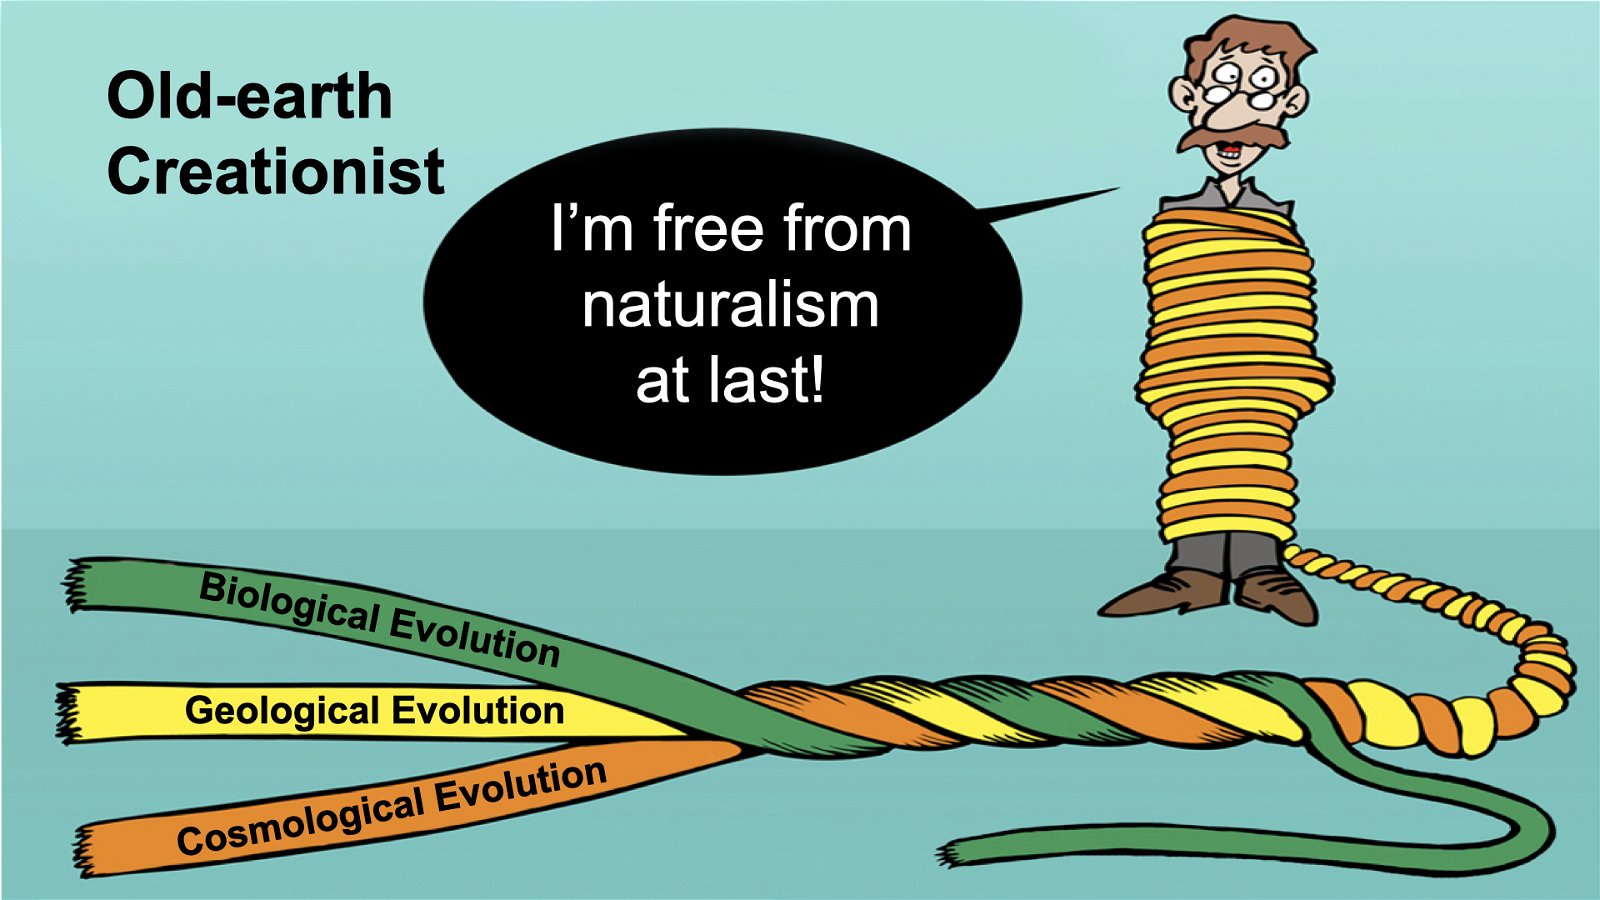 Old-earth creationists